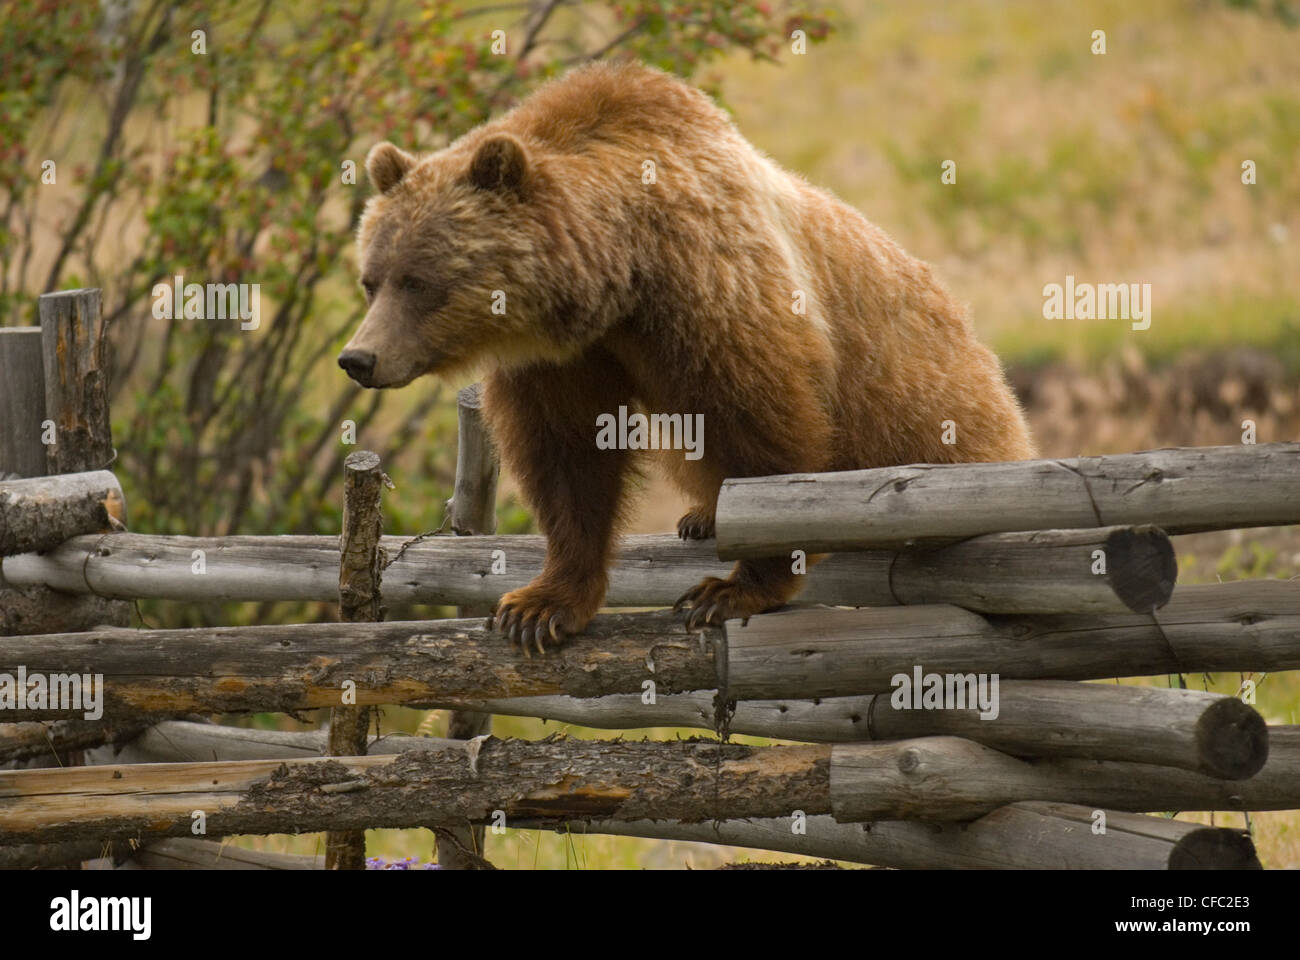 A sow Grizzly Bear on a Russell Fence, Chilko River, British Columbia, Canada Stock Photo